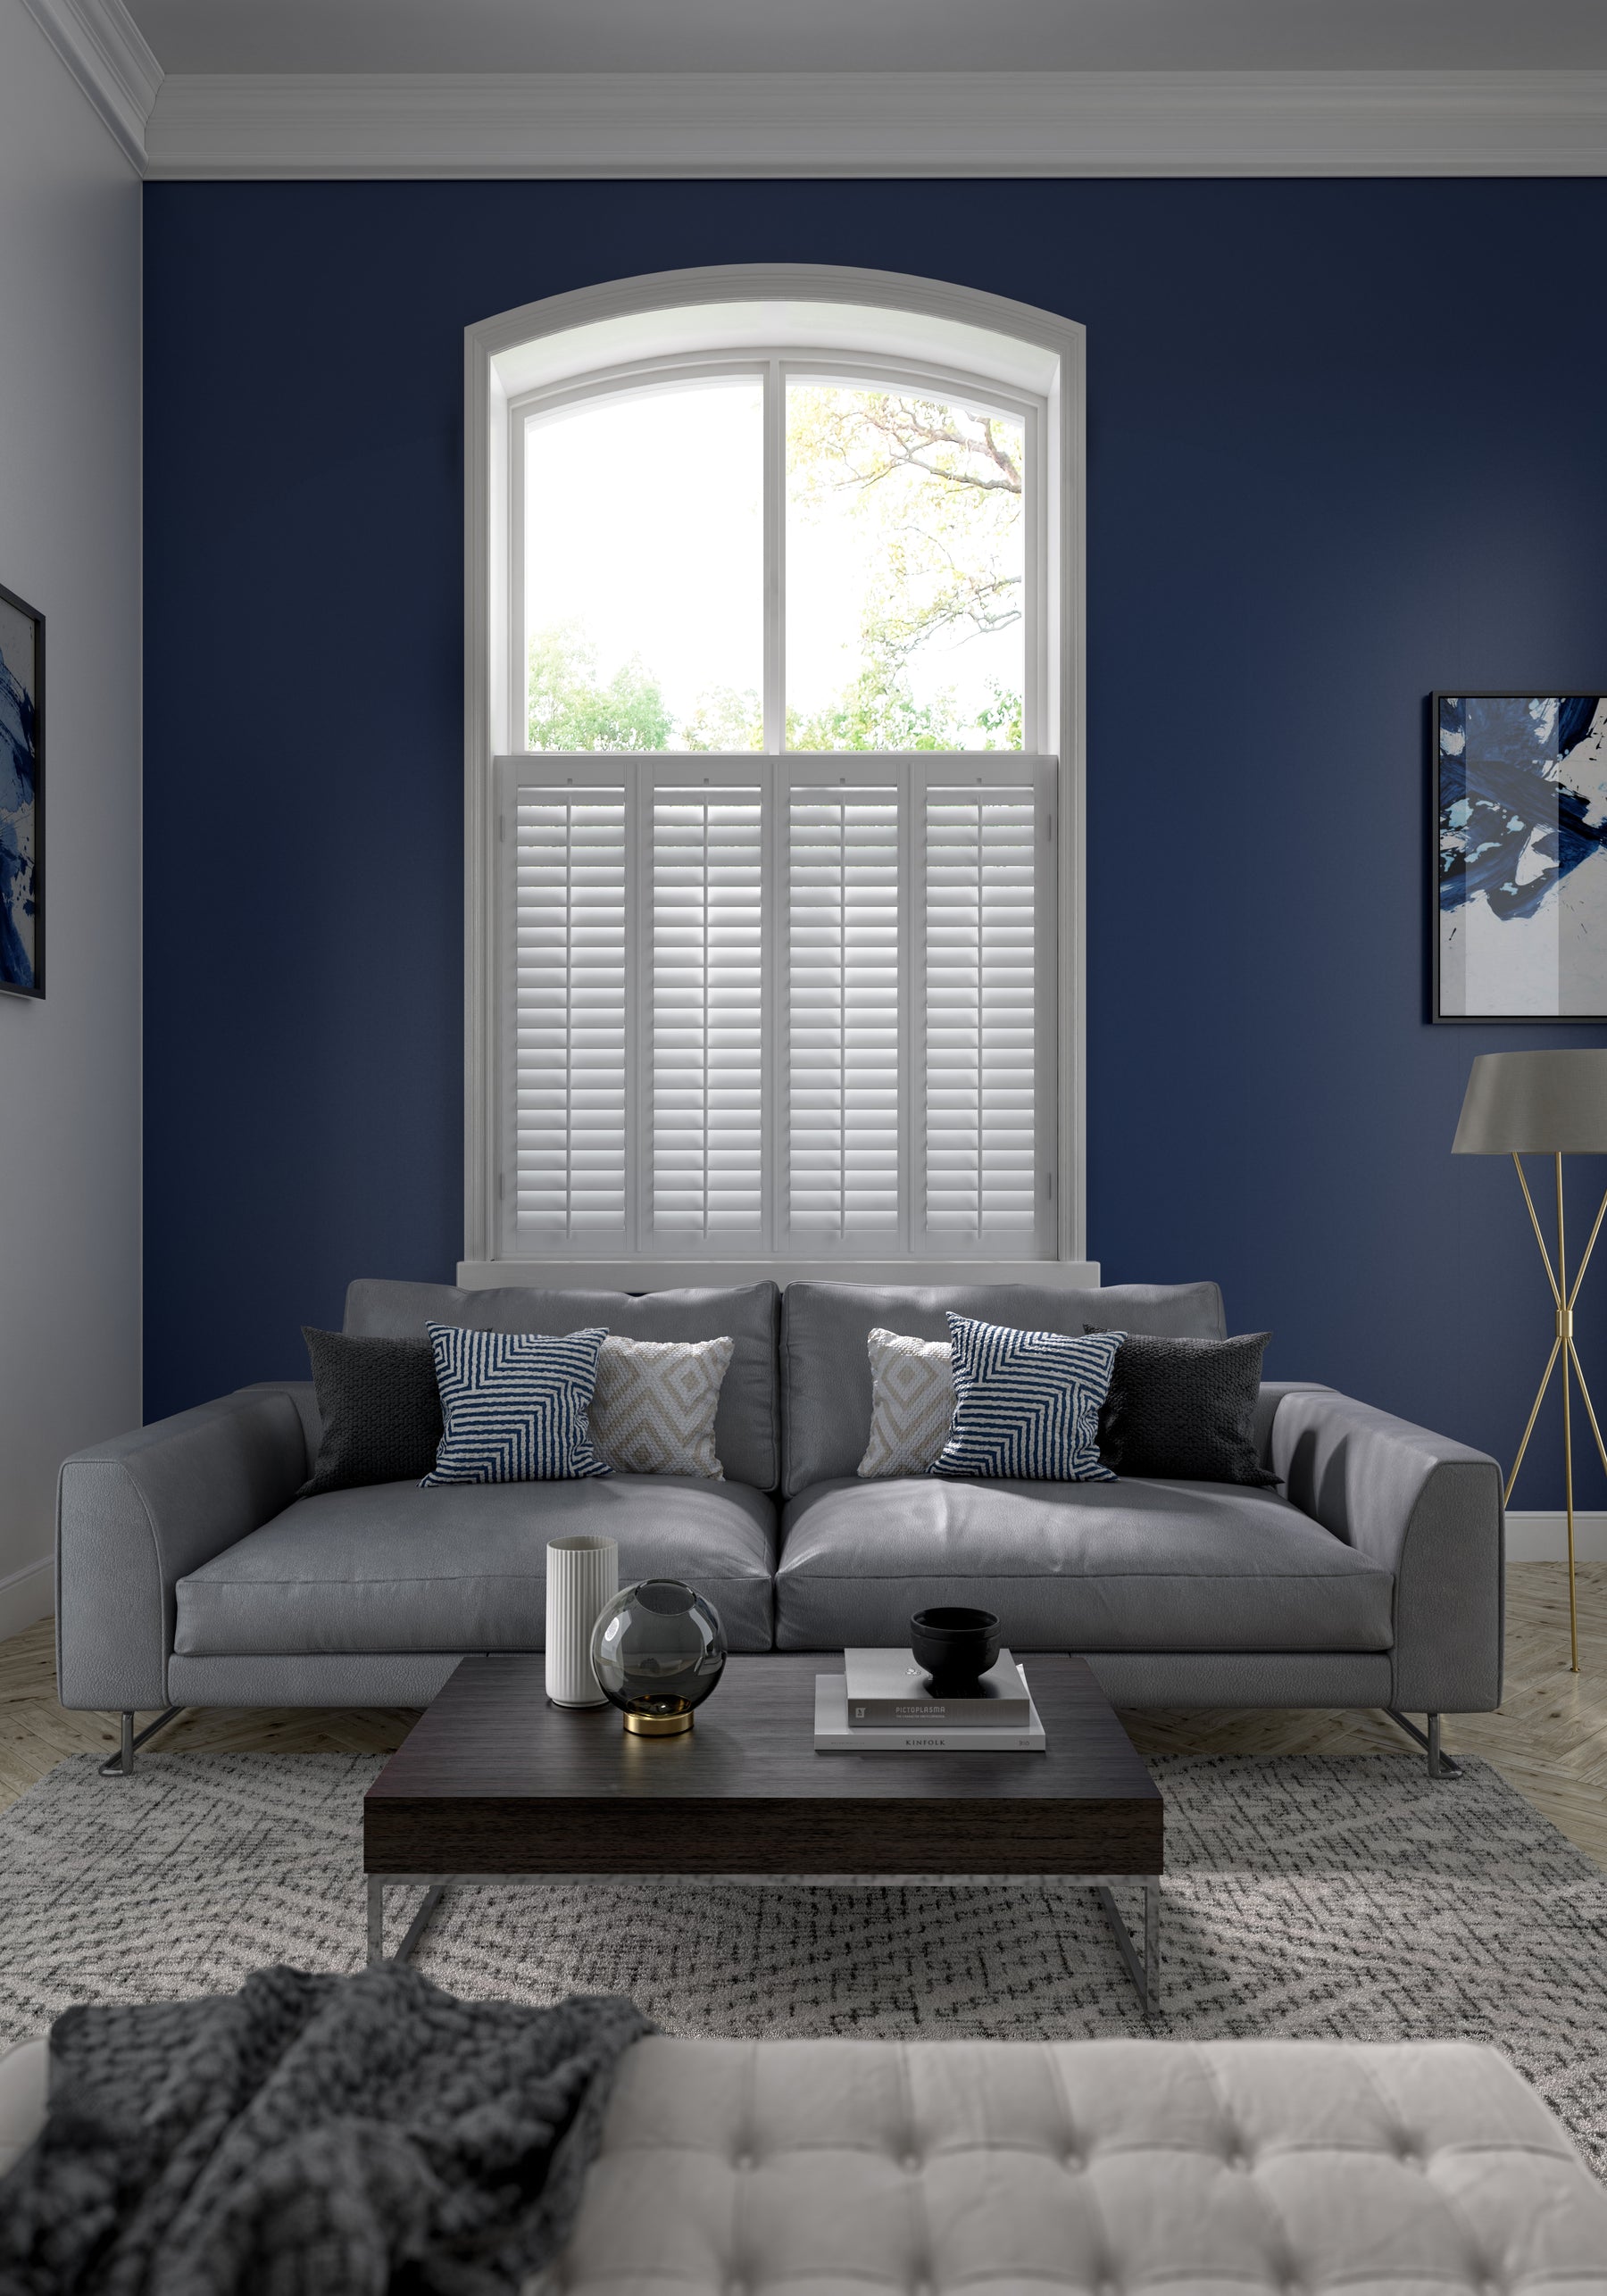 Shutters vs Blinds: Compare Prices, Durability and More